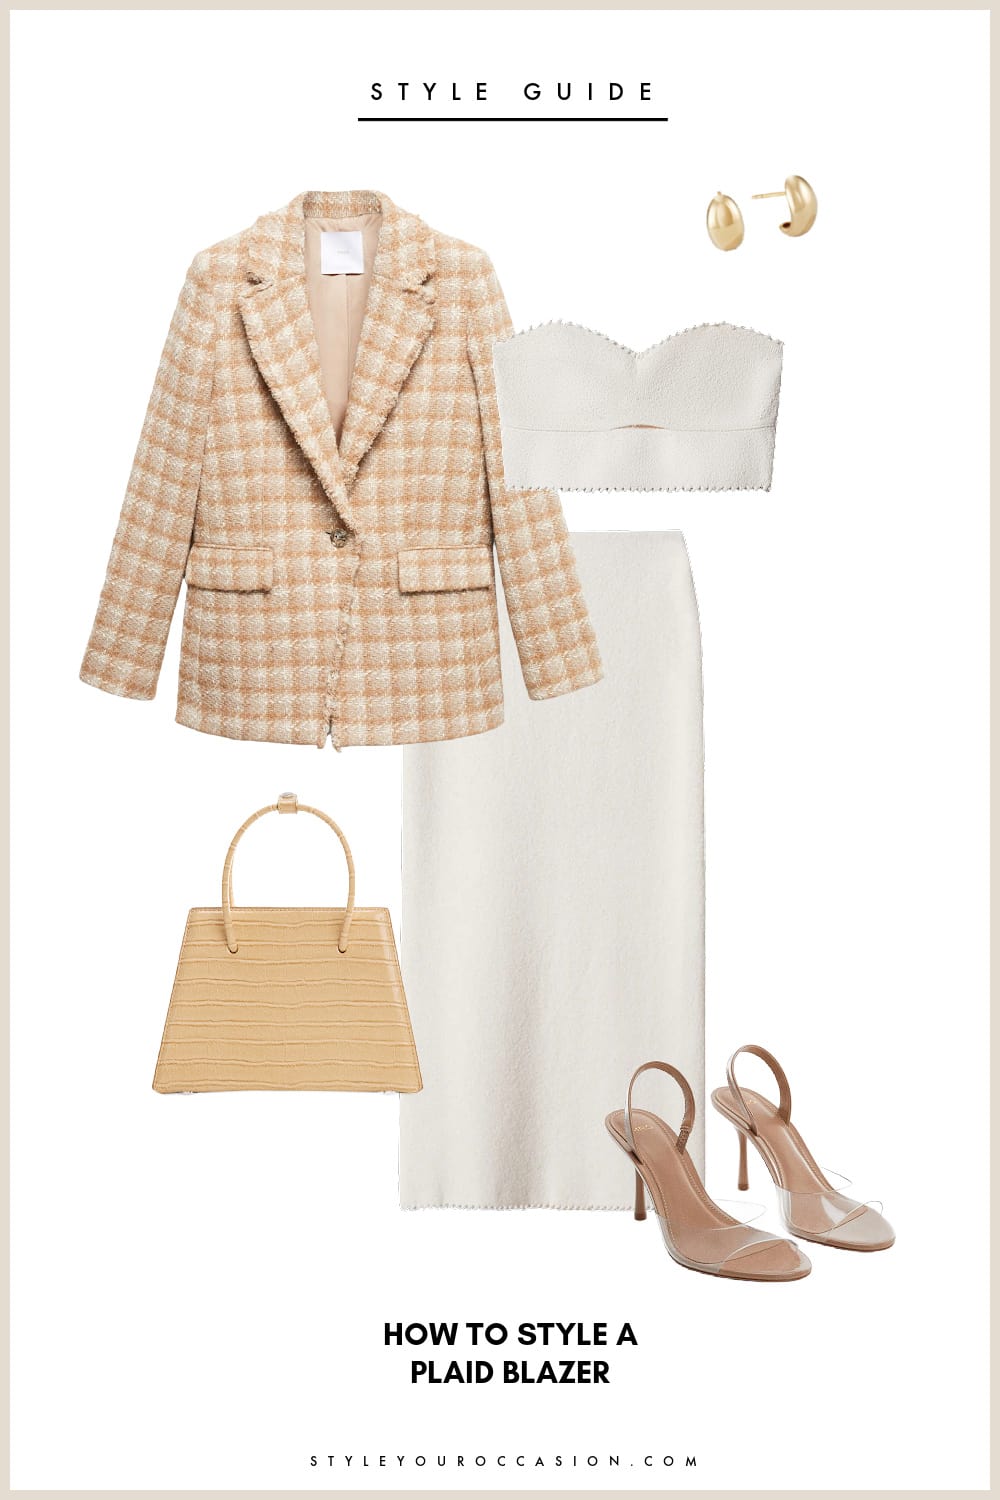 Flat lay clothes graphic with a cream and beige plaid blazer, white strapless crop top, white midi shirt, nude and acrylic heels, gold hoop earrings and a beige top handle hand bag.